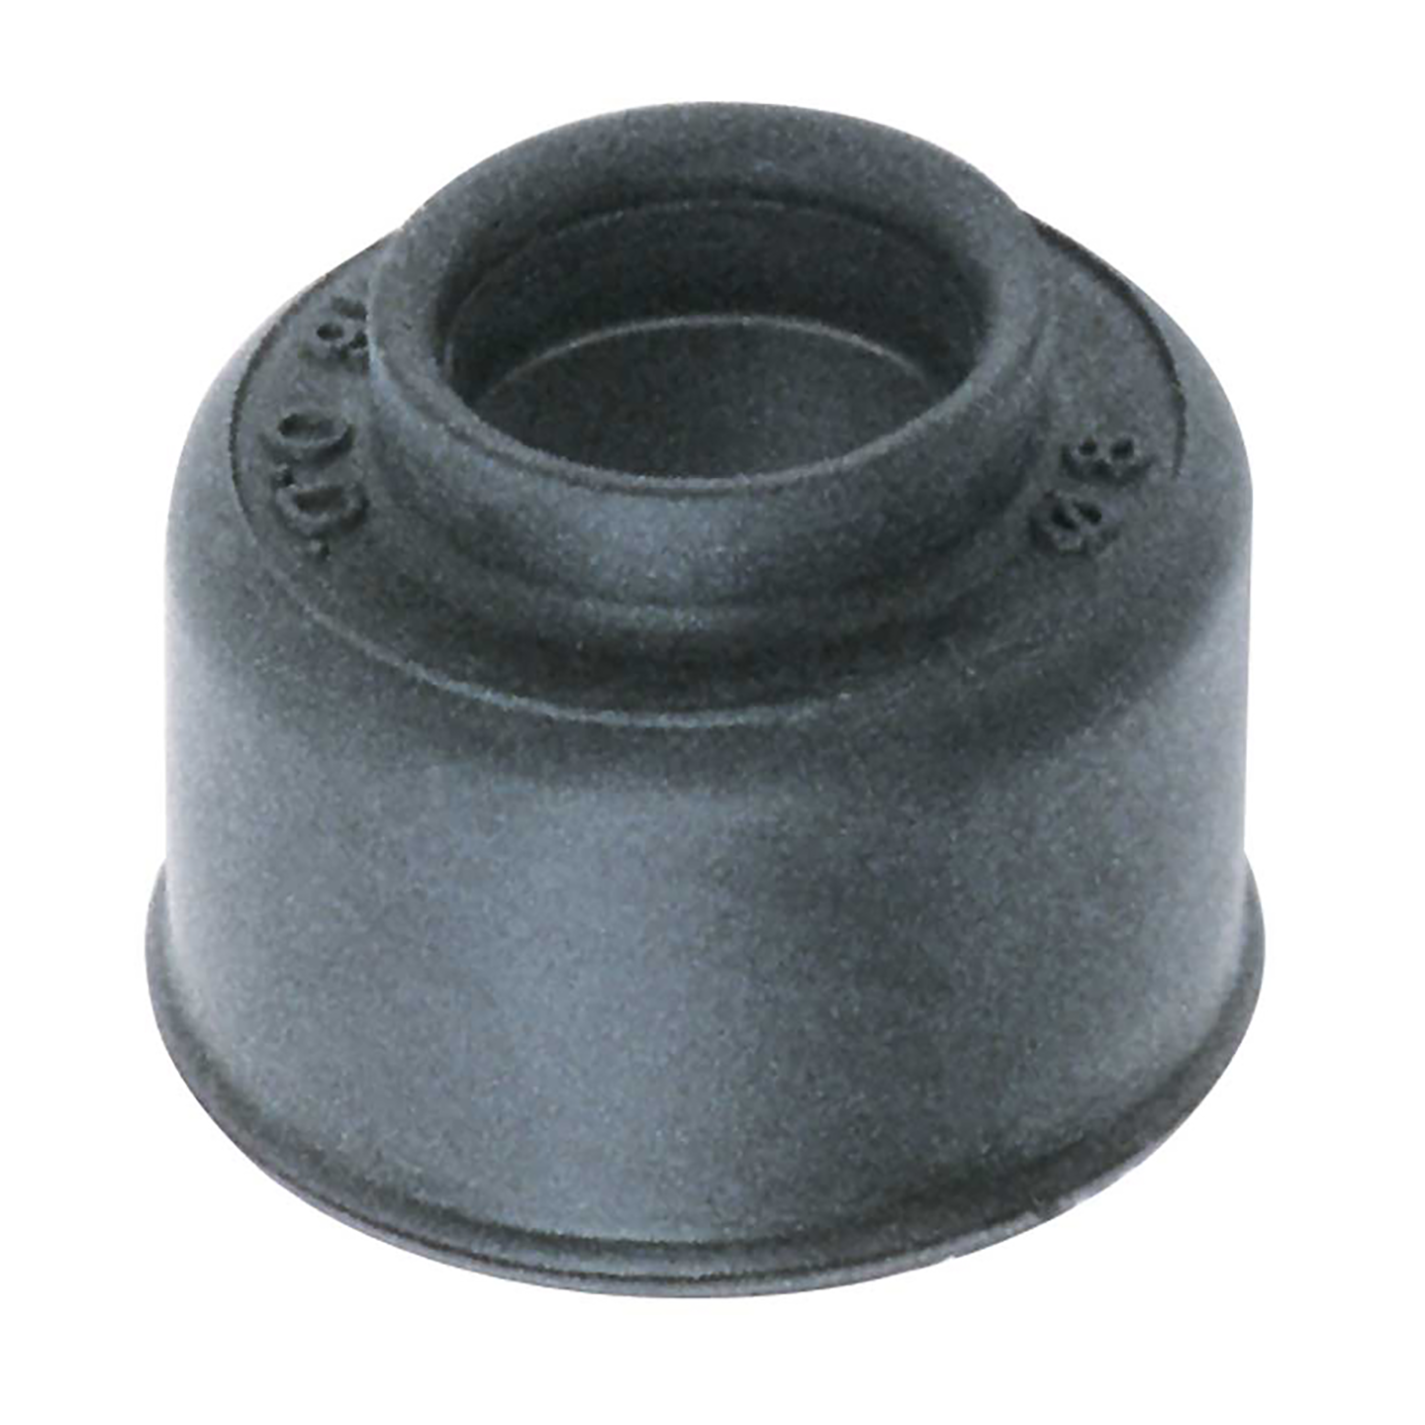 PUSH IN FITTING DUST COVER 8MM TUBE